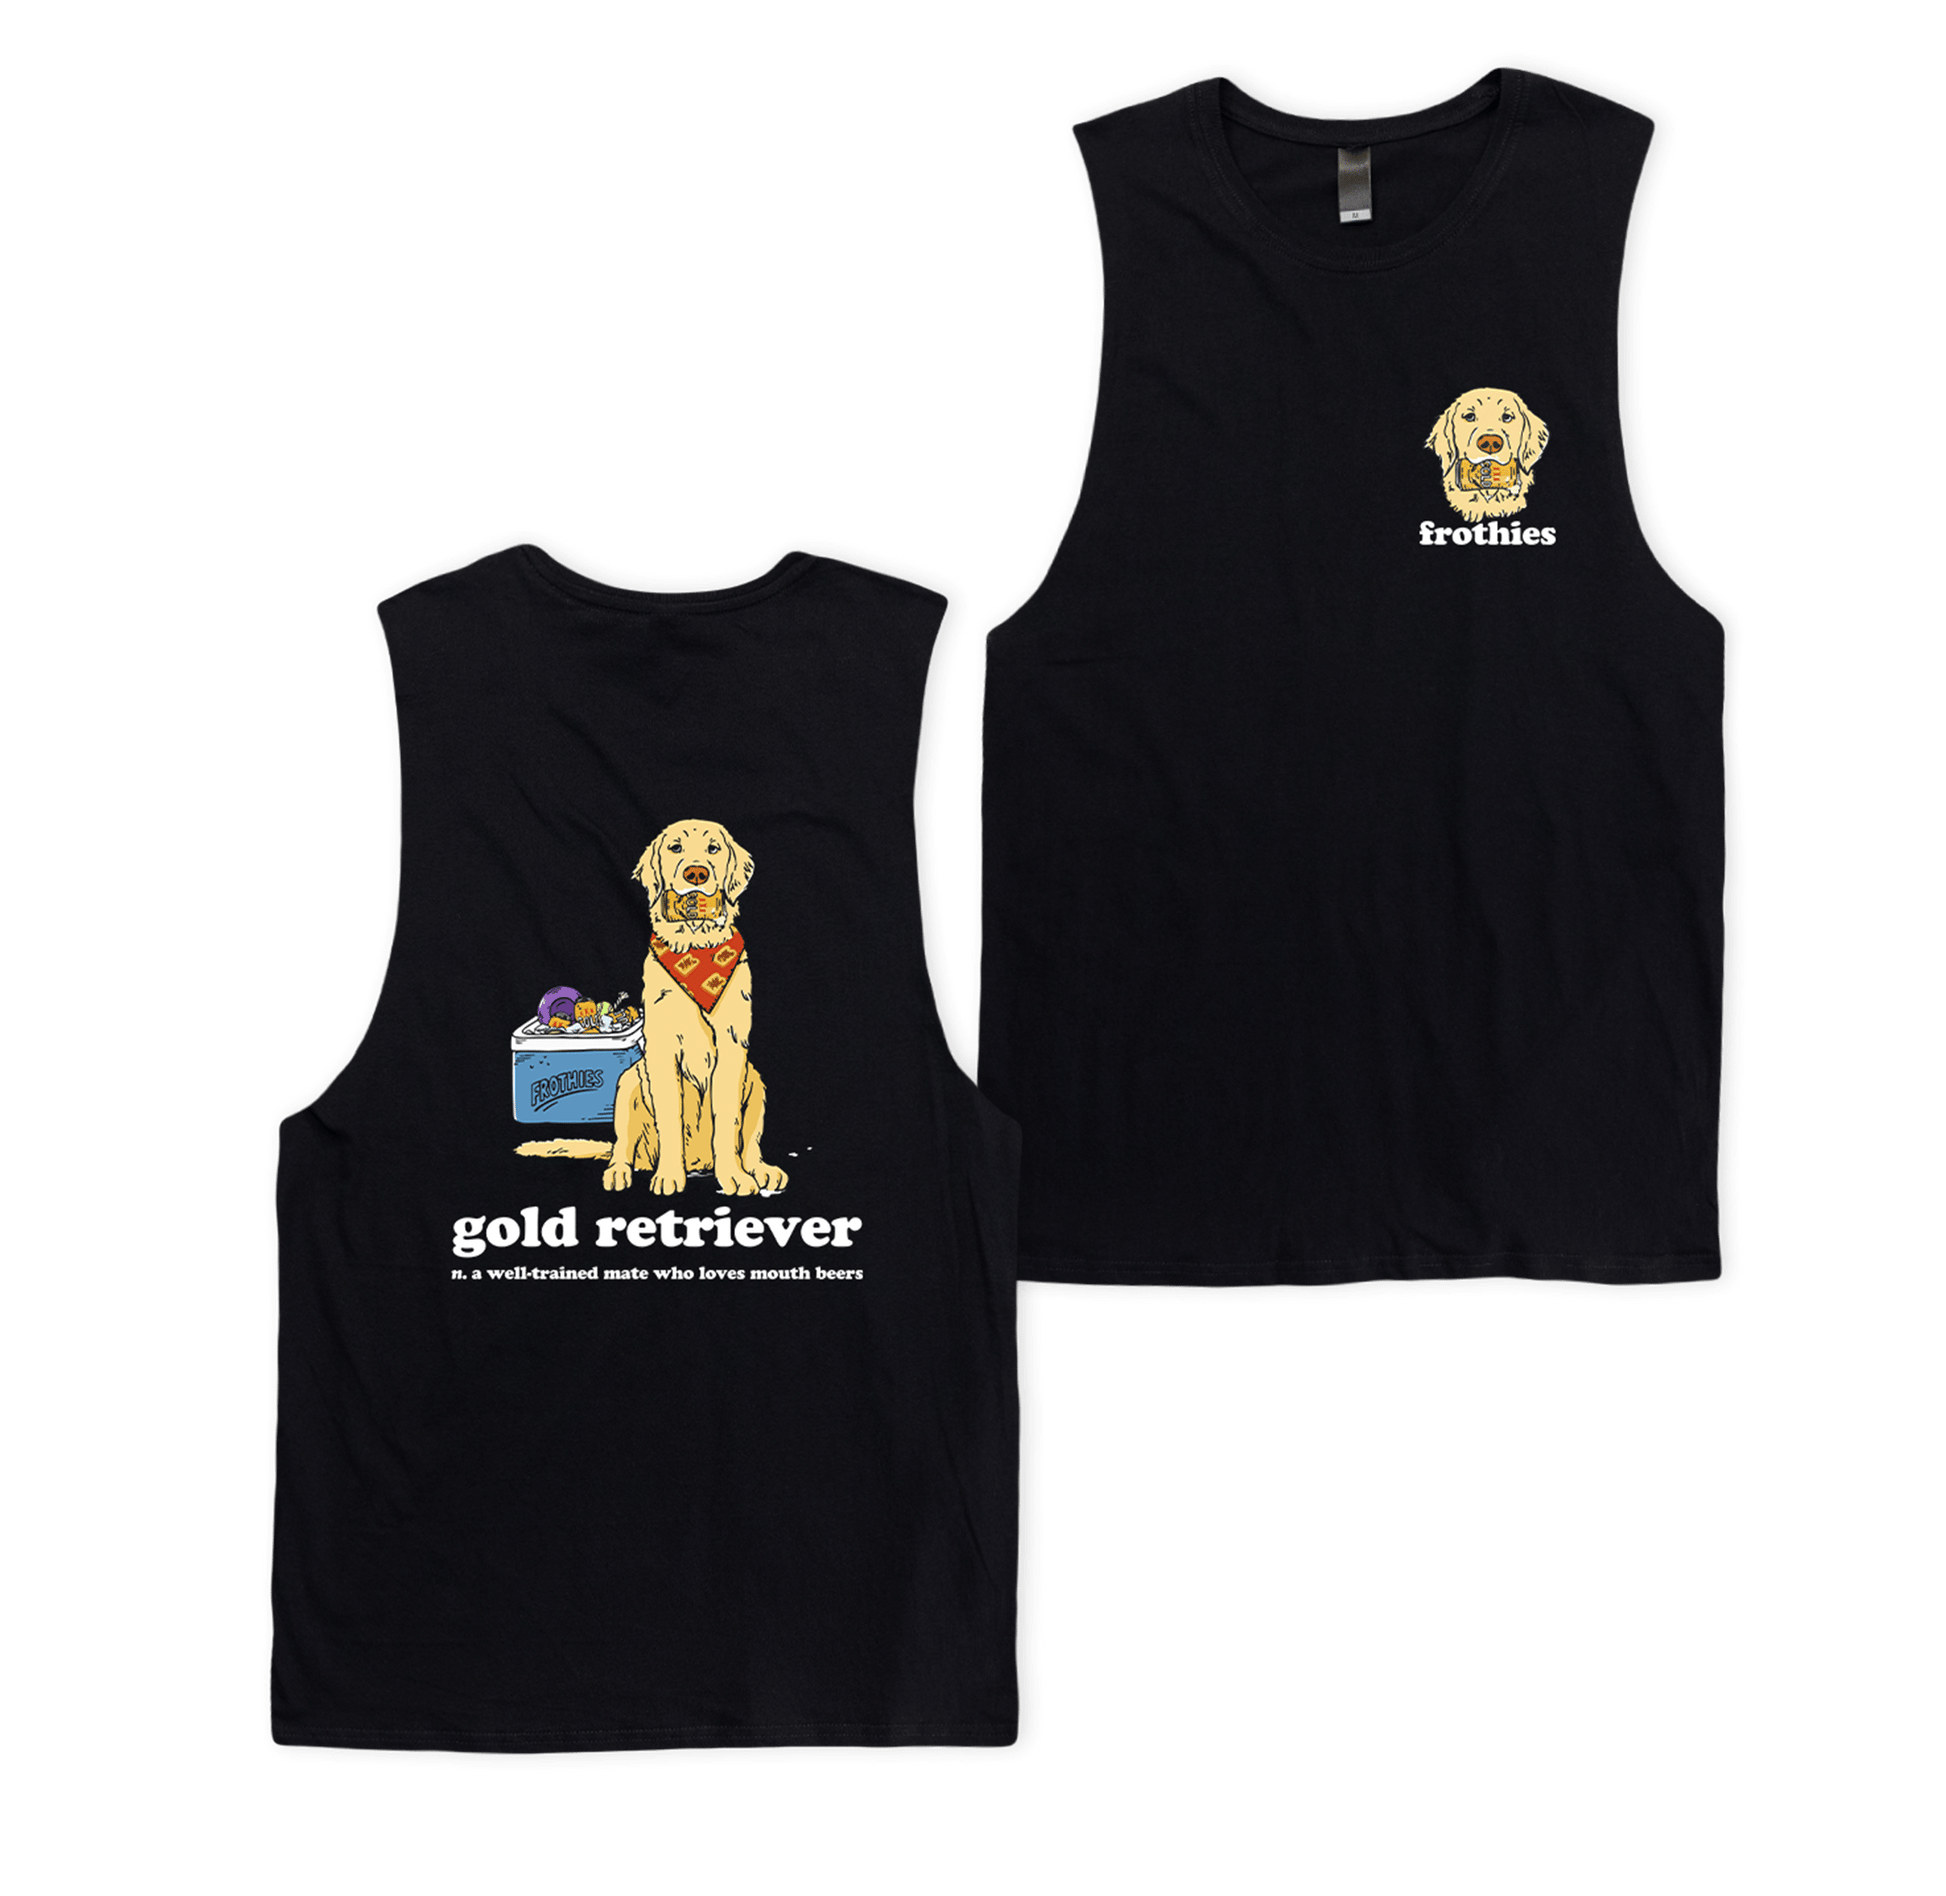 Gold Retriever Muscle Tee Muscle Tanks Frothies